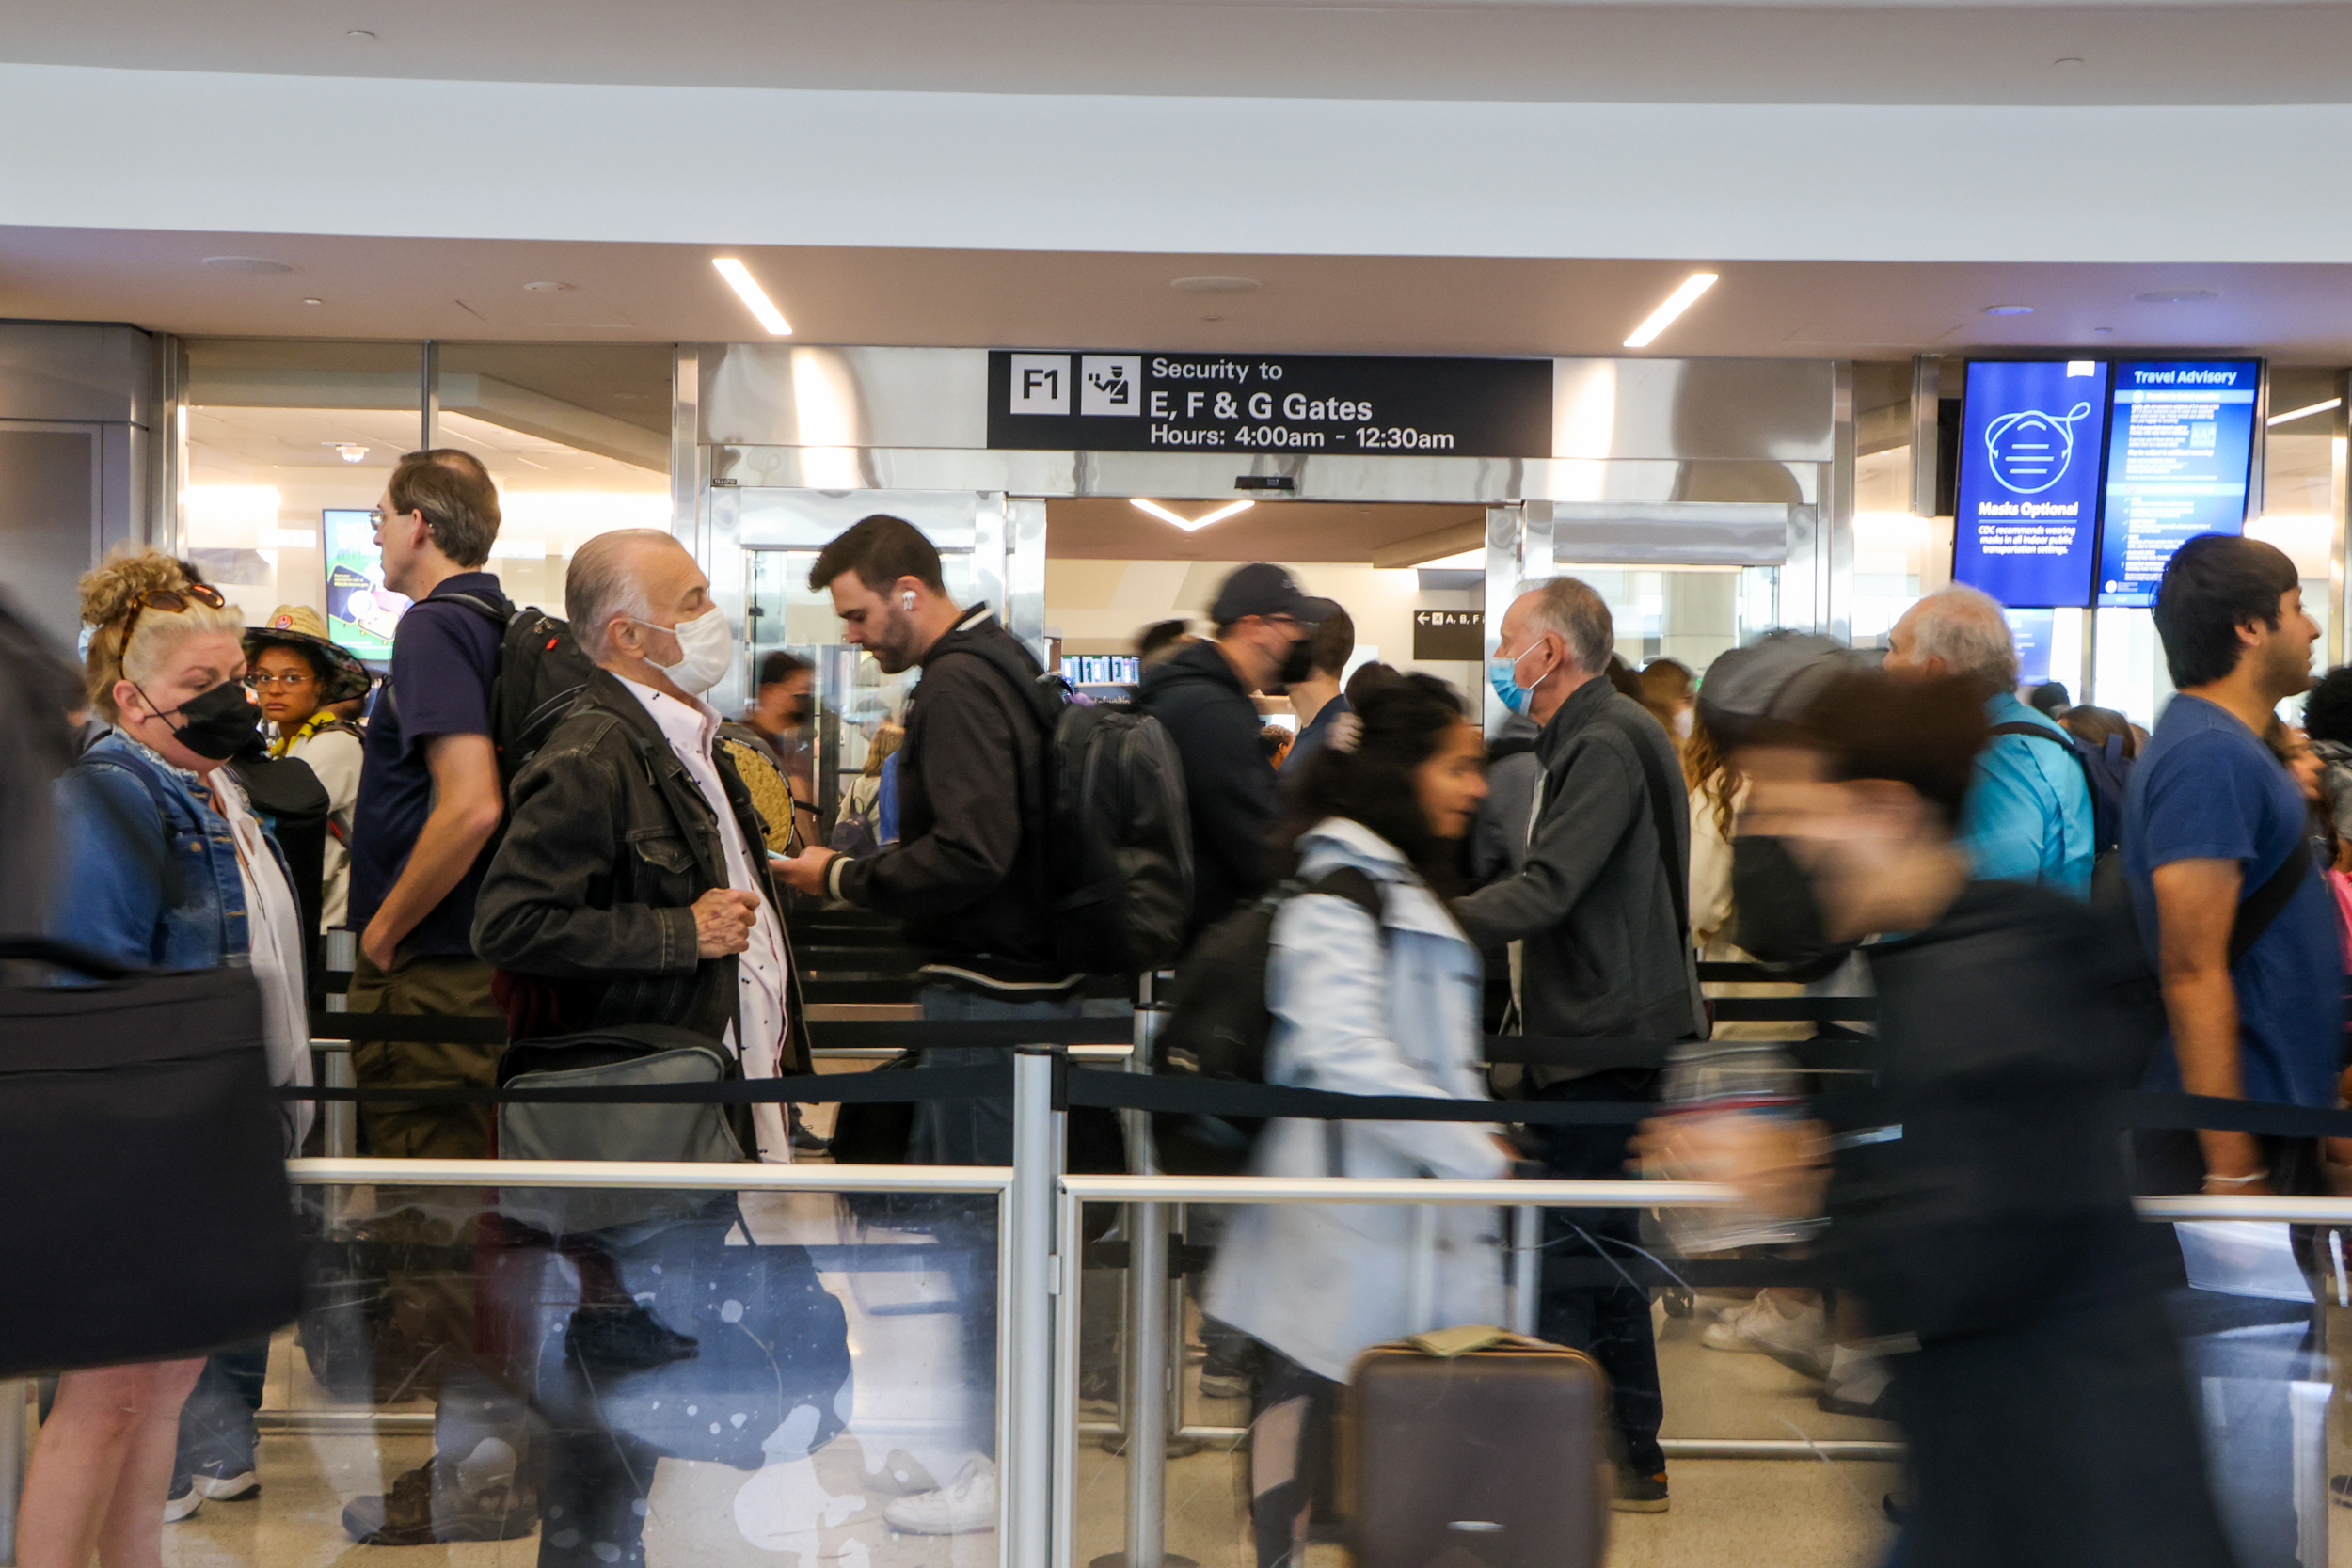 This image shows a crowded airport security checkpoint line with people wearing masks, carrying bags, and standing in queues under a sign for gates E, F, and G.